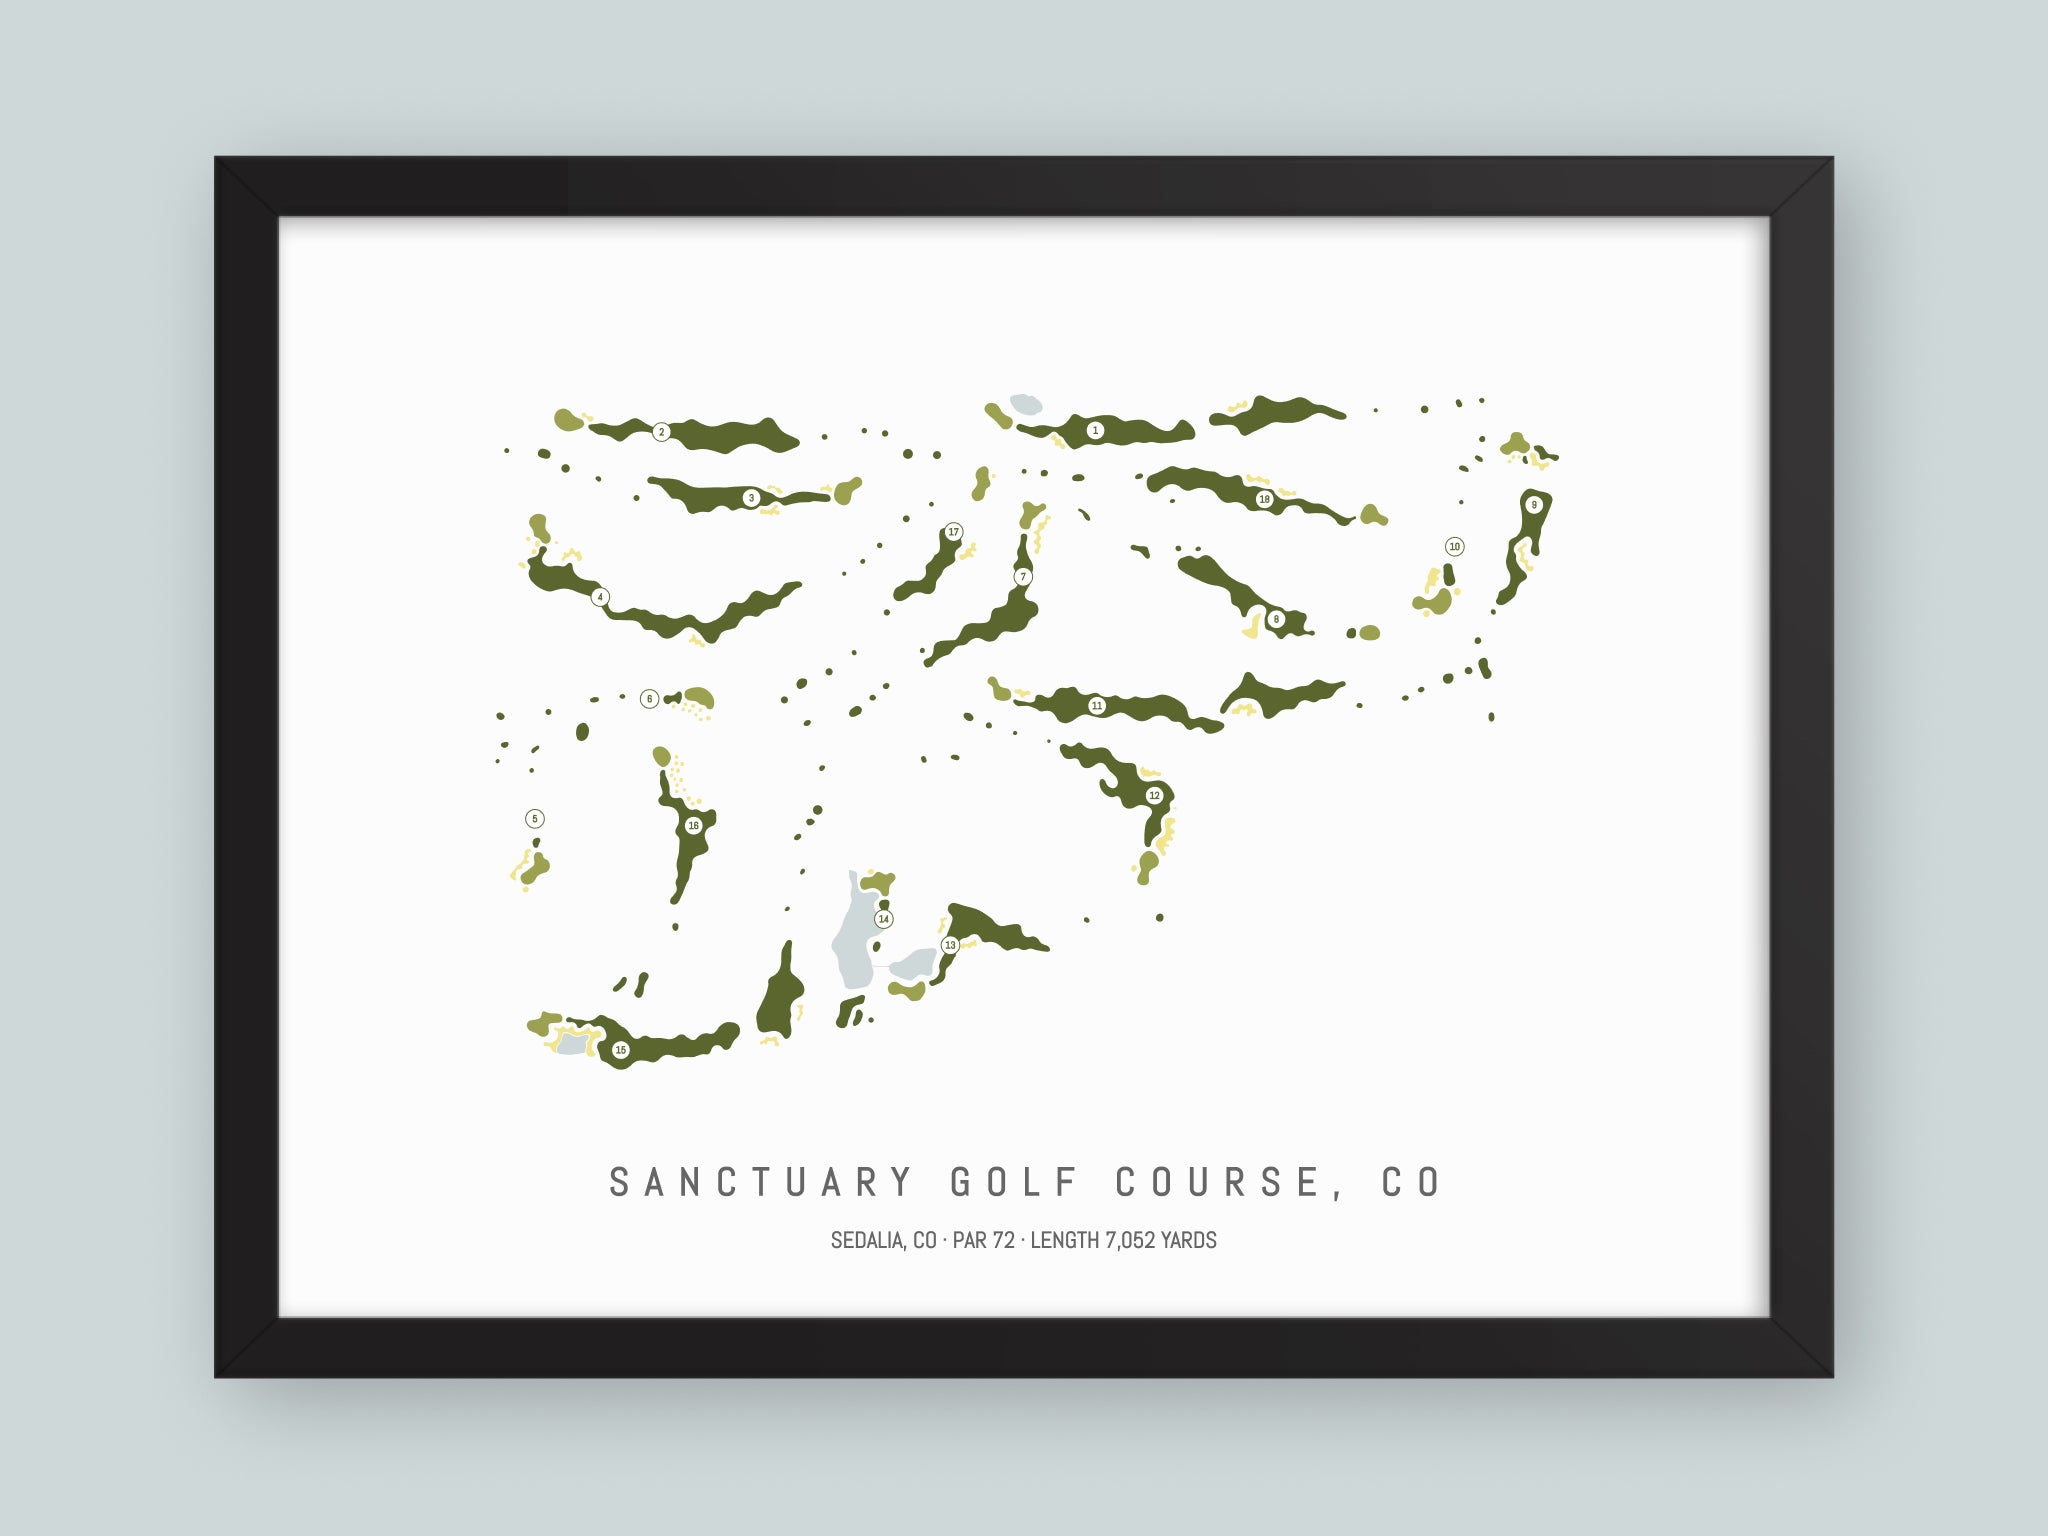 Sanctuary-Golf-Course-CO--Black-Frame-24x18-With-Hole-Numbers